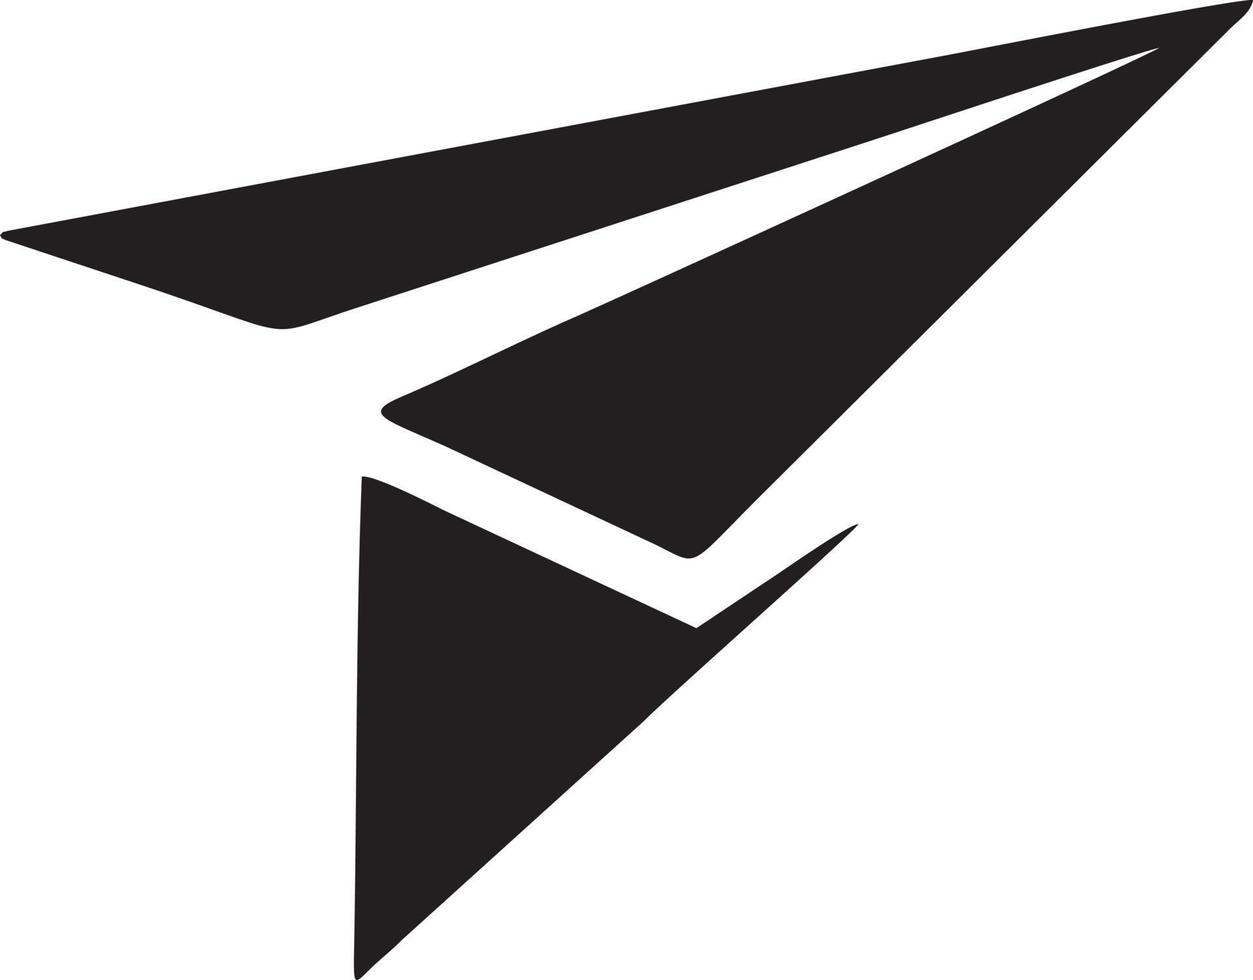 Paper plane icon symbol image vector, illustration of the flight aviation in black image. EPS 10 vector